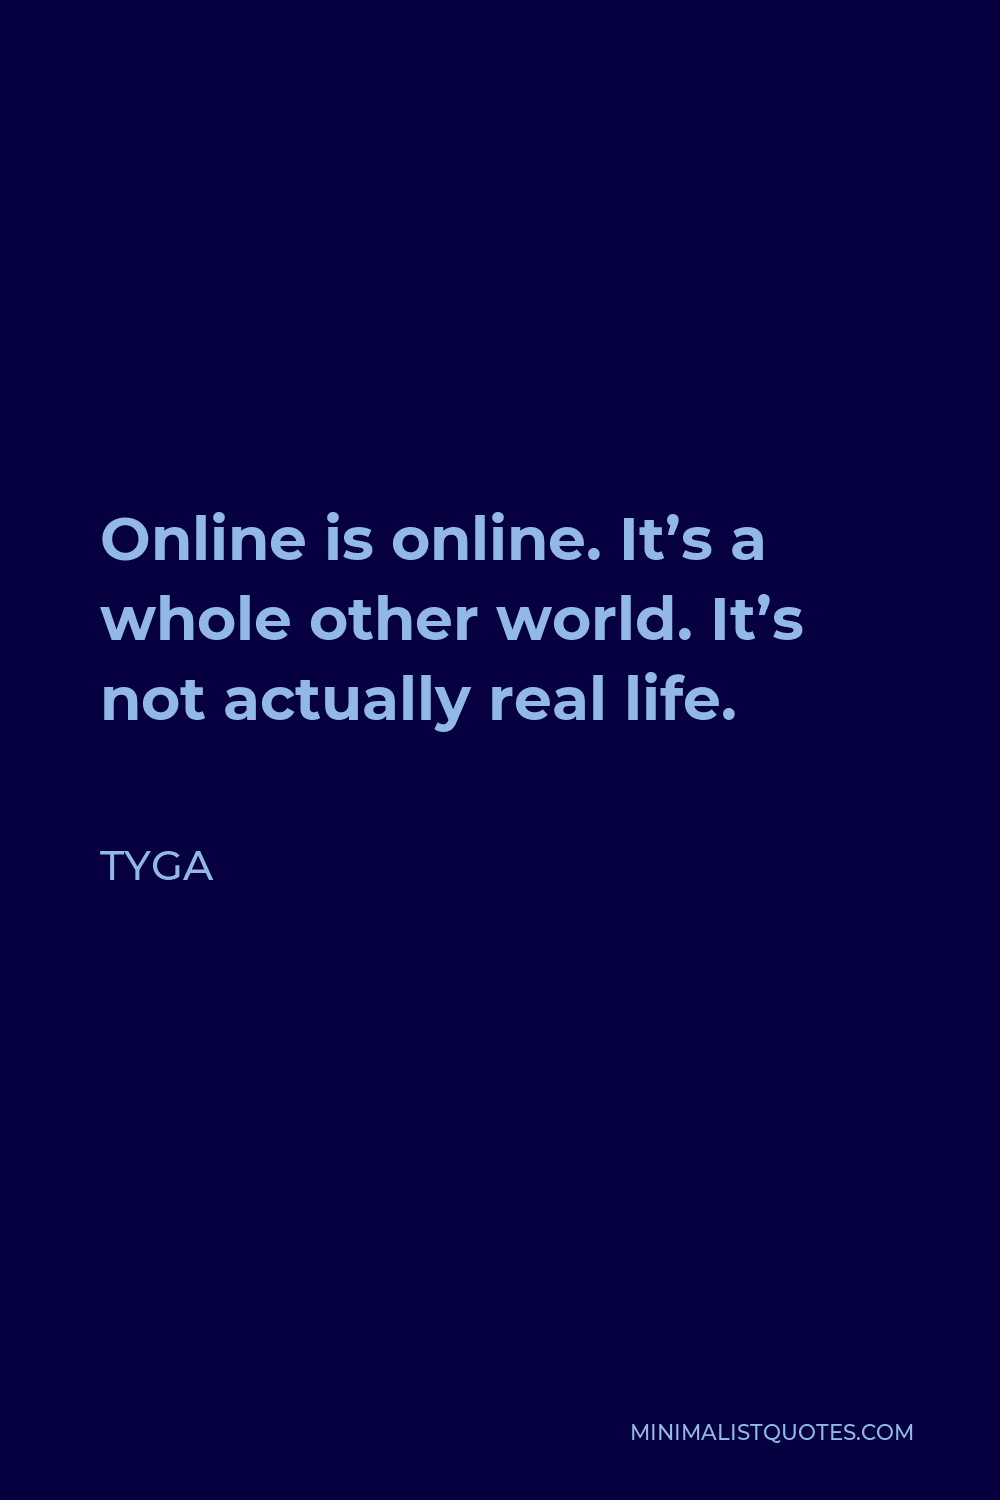 Tyga Quote - Online is online. It’s a whole other world. It’s not actually real life.